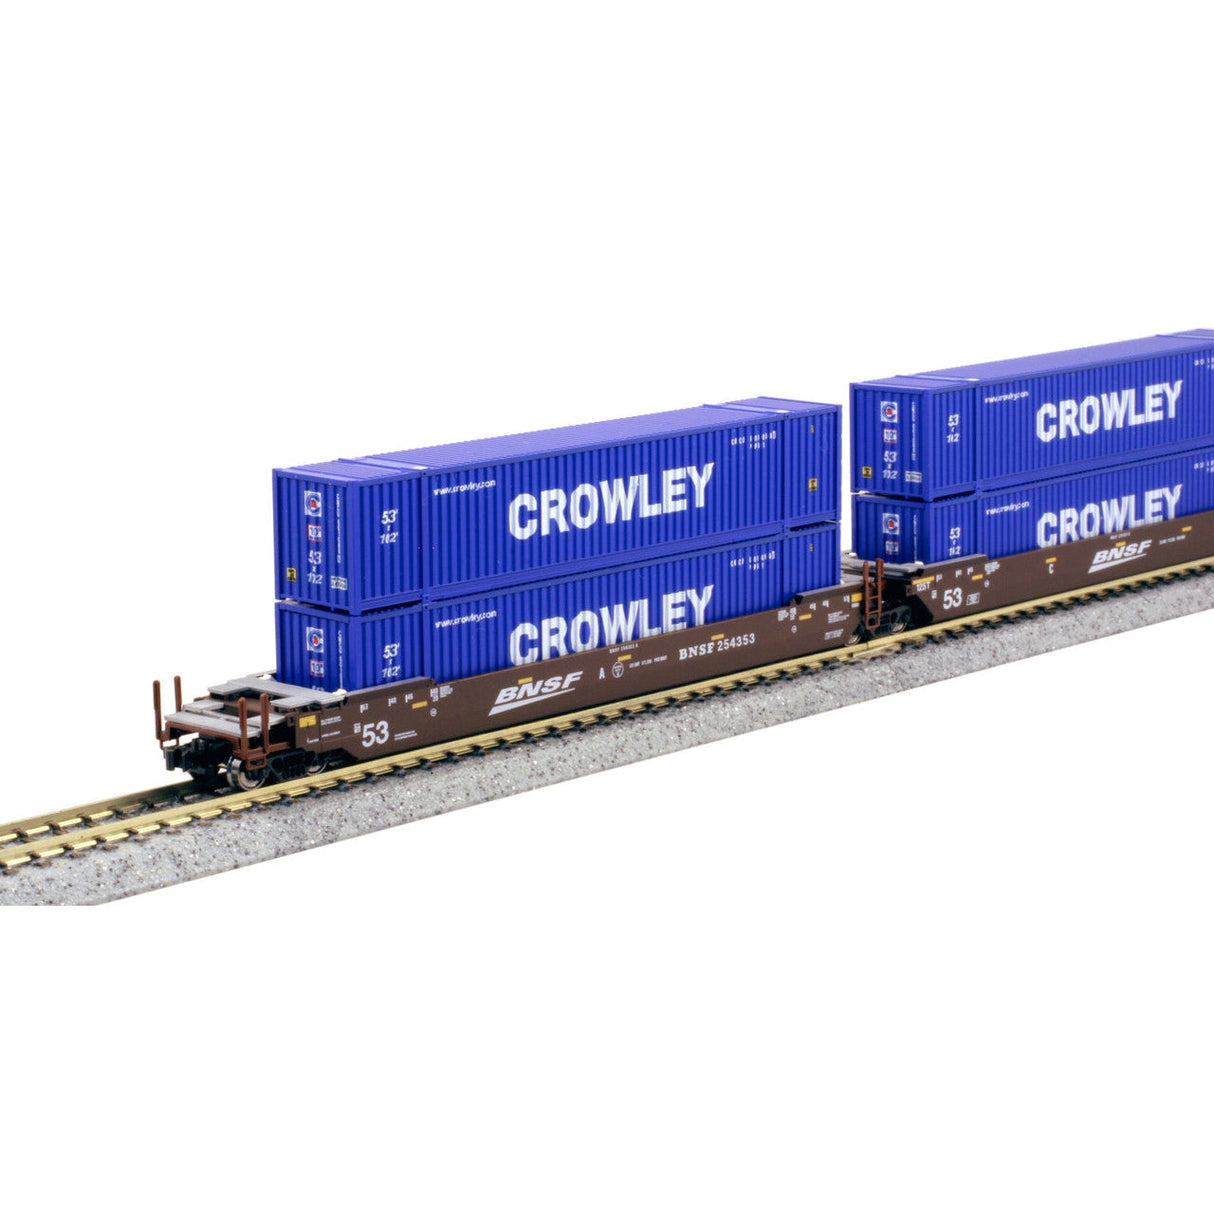 Kato N Scale BNSF Gunderson Maxi-IV Double Stack Cars 254353 3 Pack with Crowley Containers